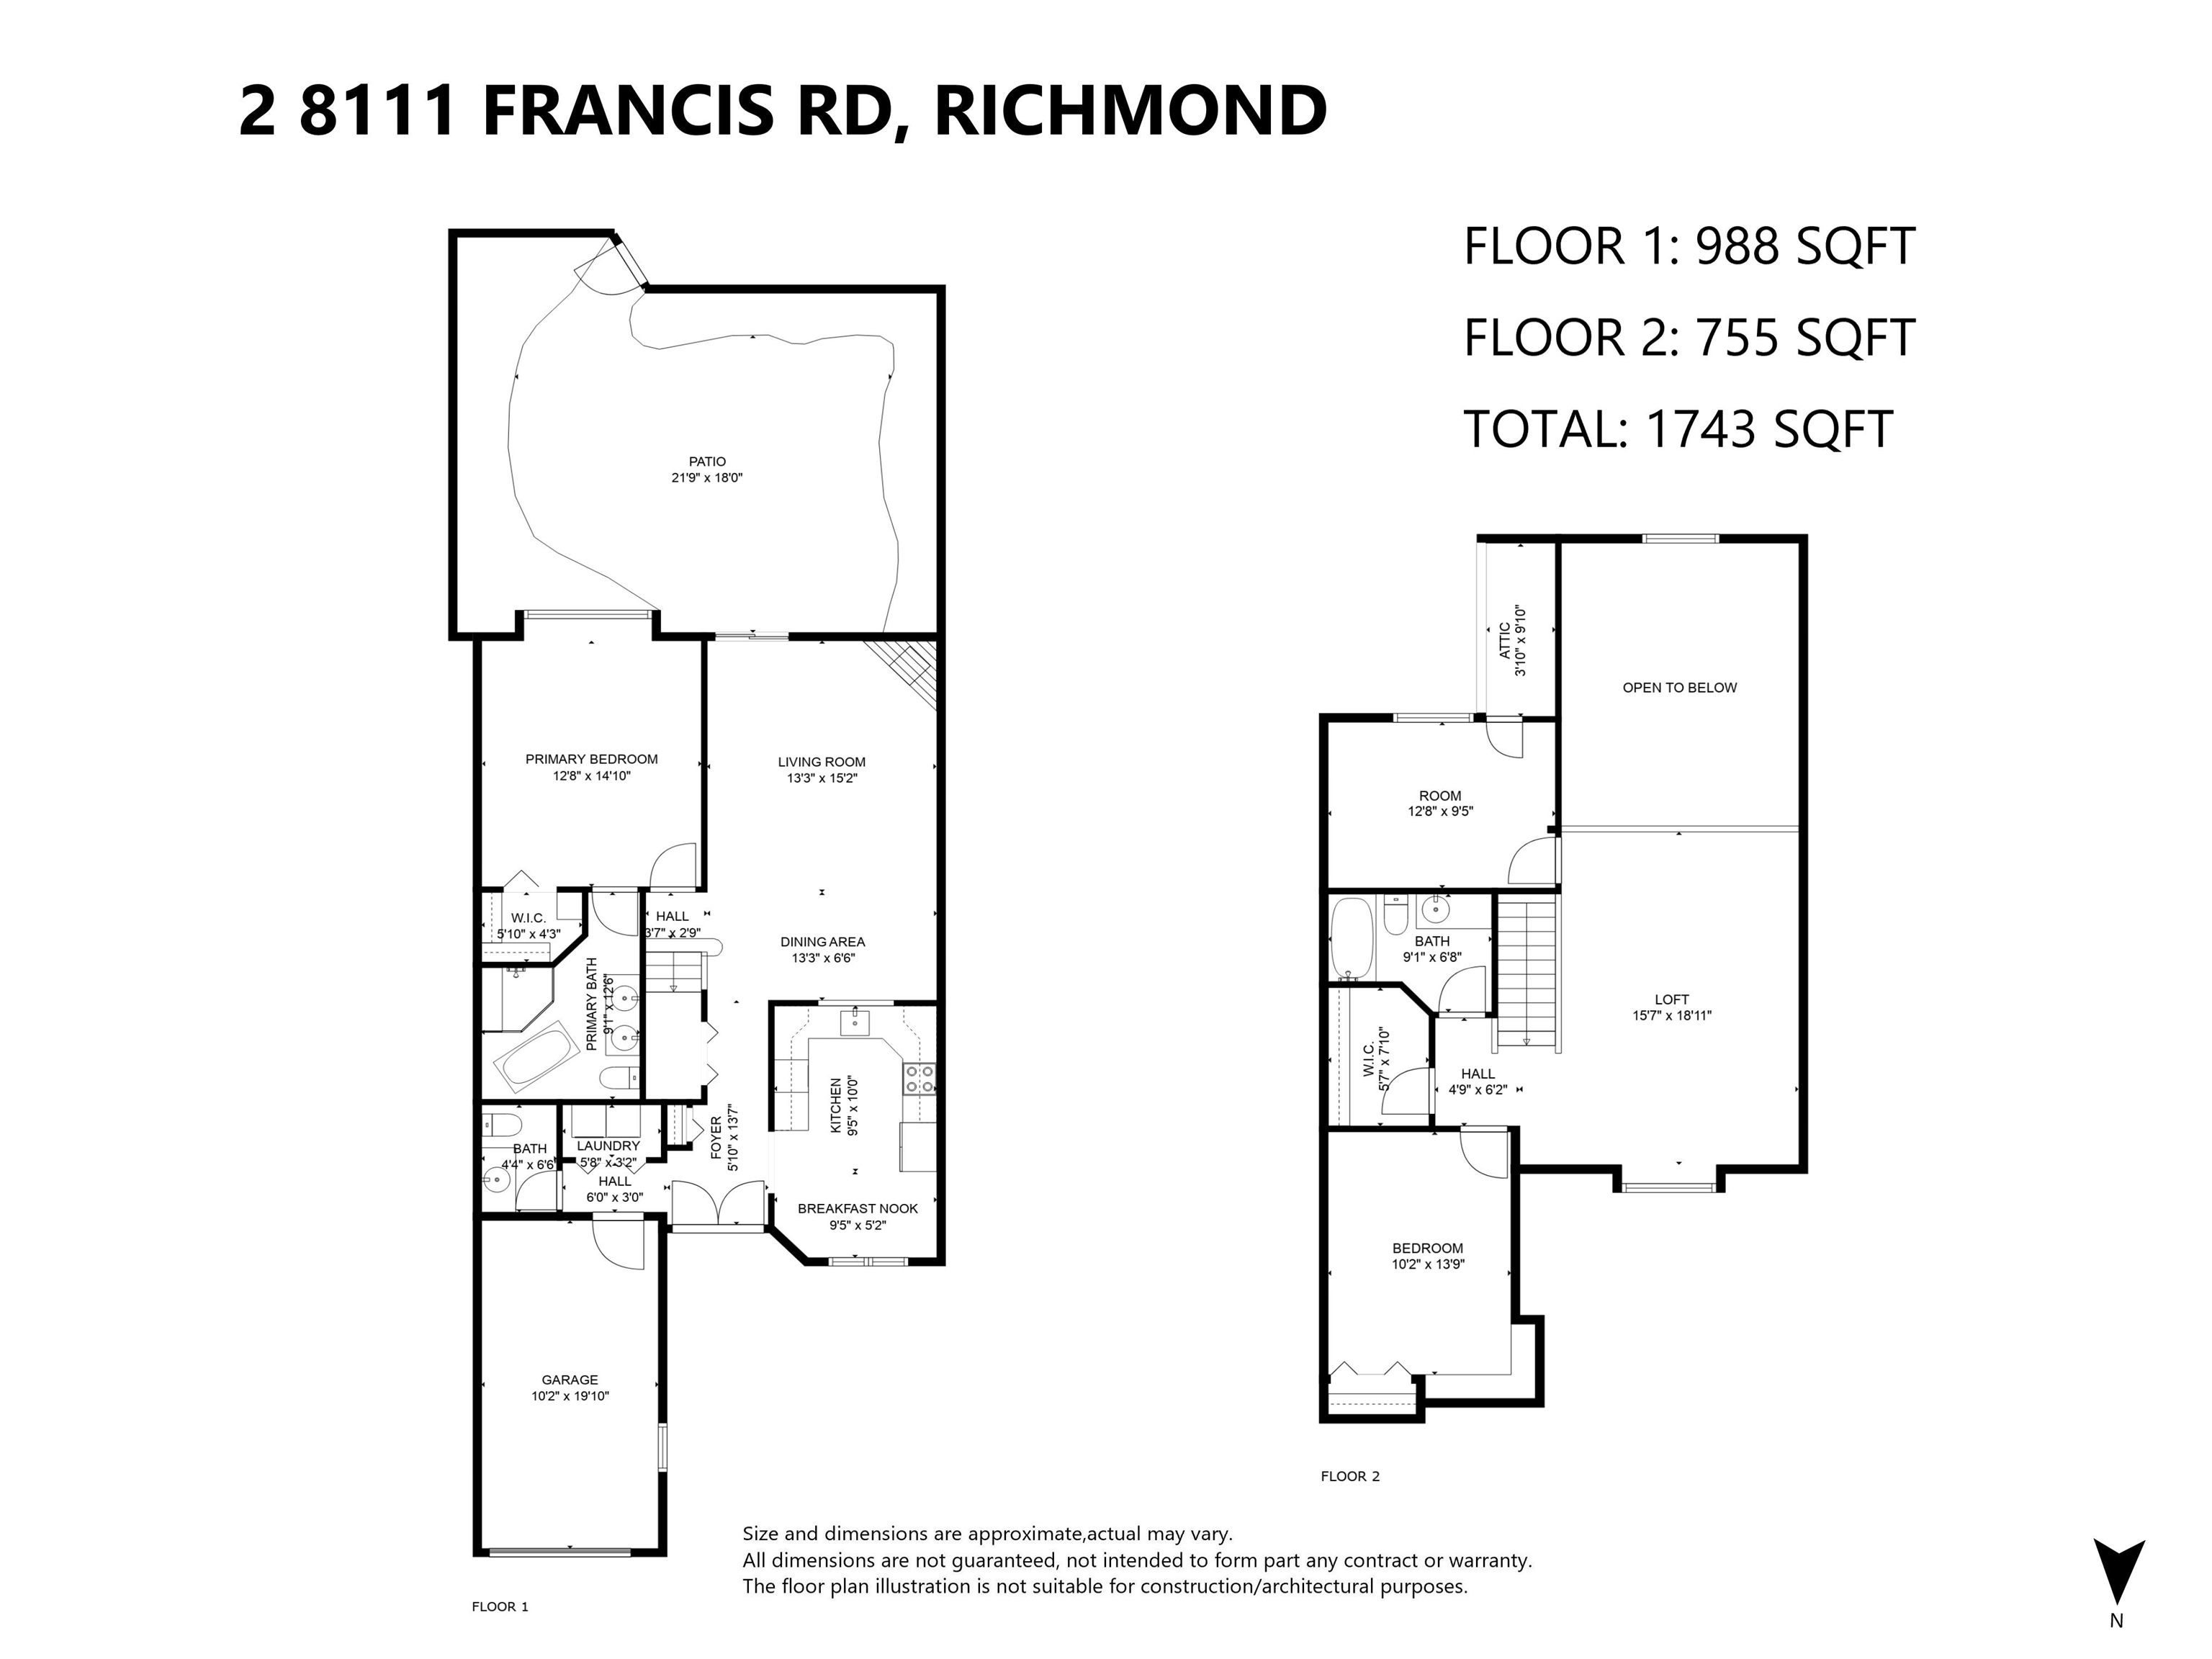 Listing image of 2 8111 FRANCIS ROAD